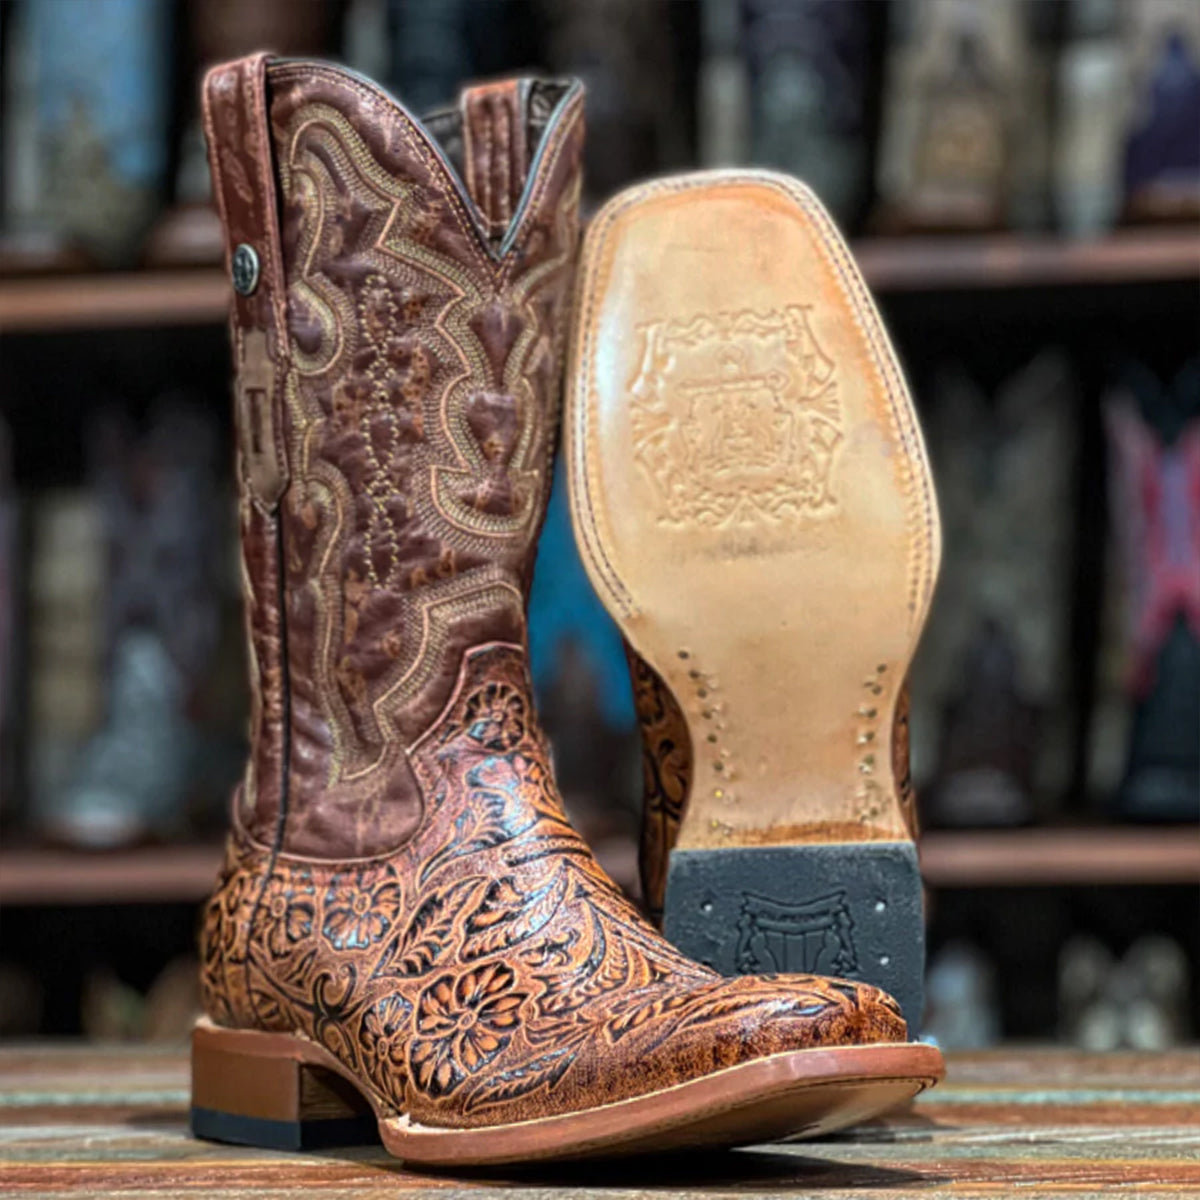 tooled leather boots by Tanner Mark Boots